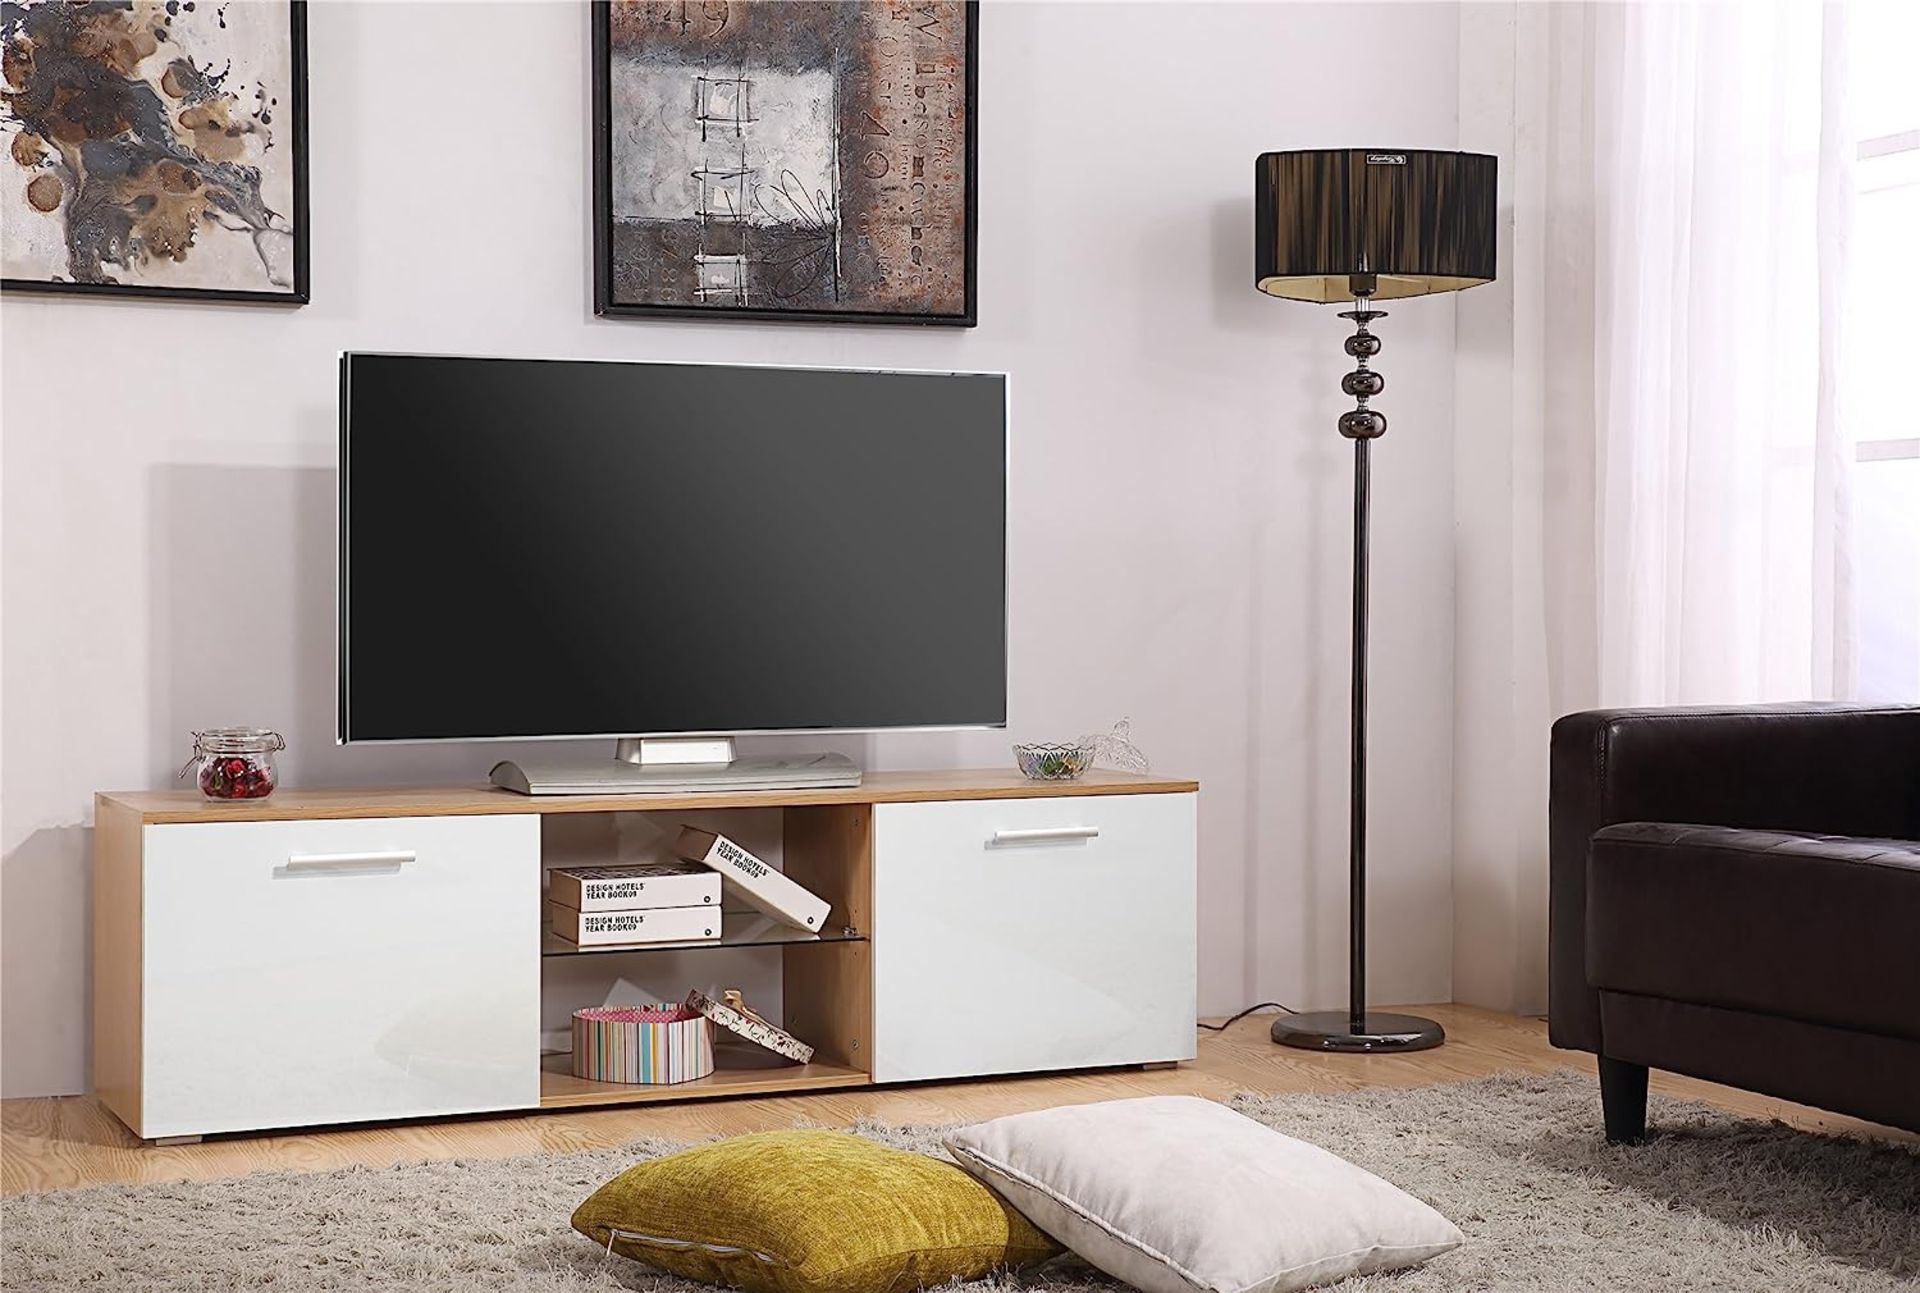 BRAND NEW HARMIN MODERN 160CM TV STAND CABINET UNIT WITH HIGH GLOSS DOORS (WHITE ON OAK) - Image 2 of 9